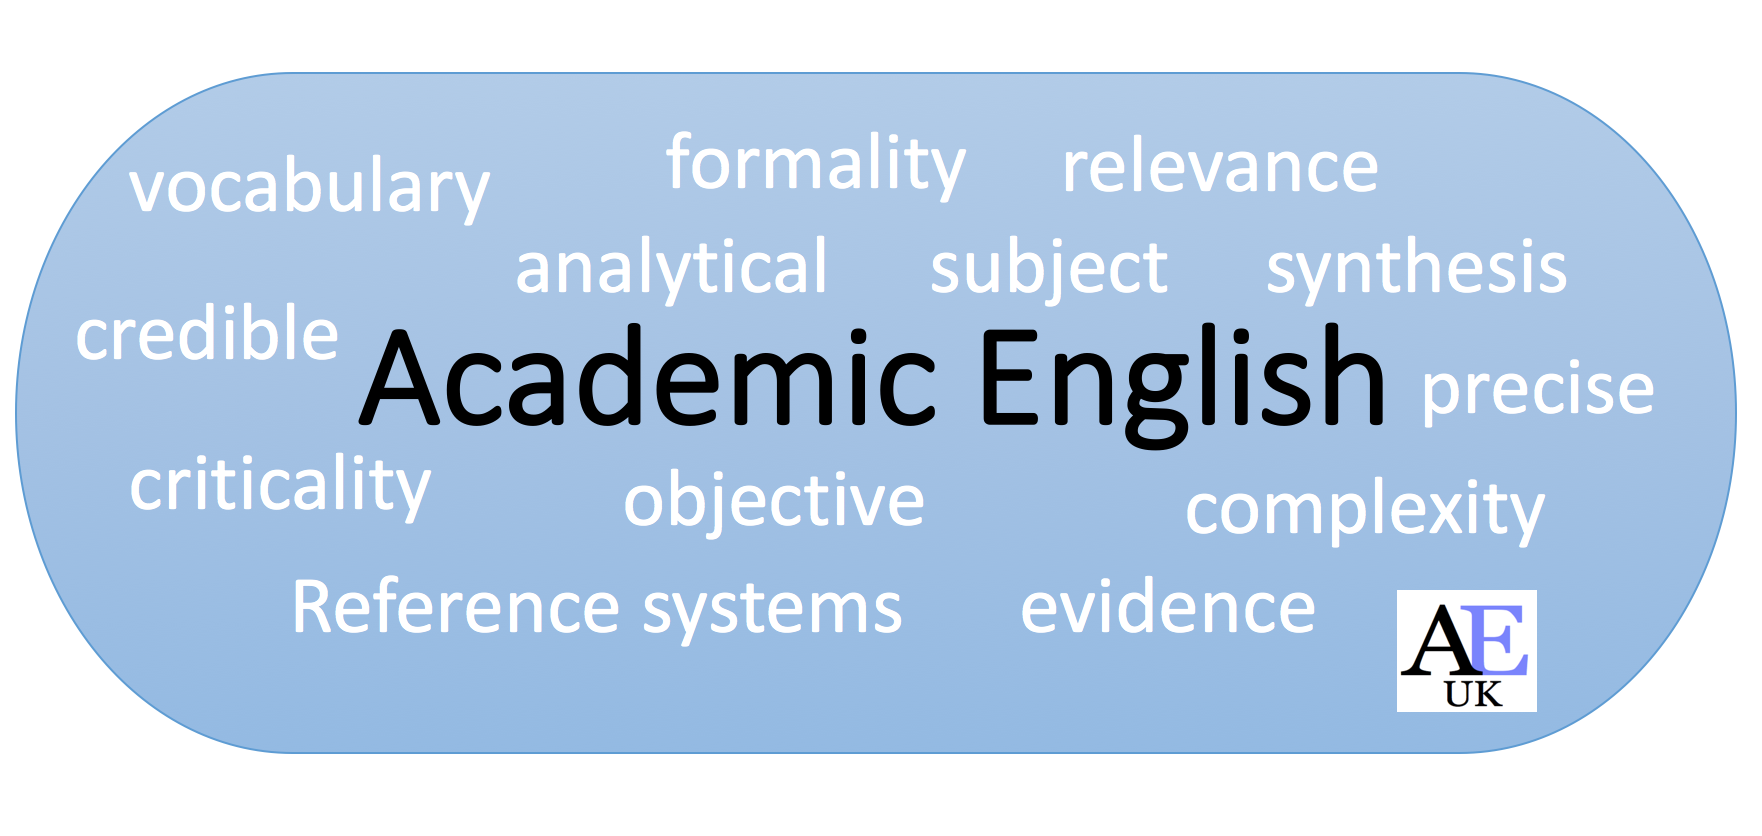 Issue is being discussed. Academic English. Академический английский. Академик Инглиш. Academic language.